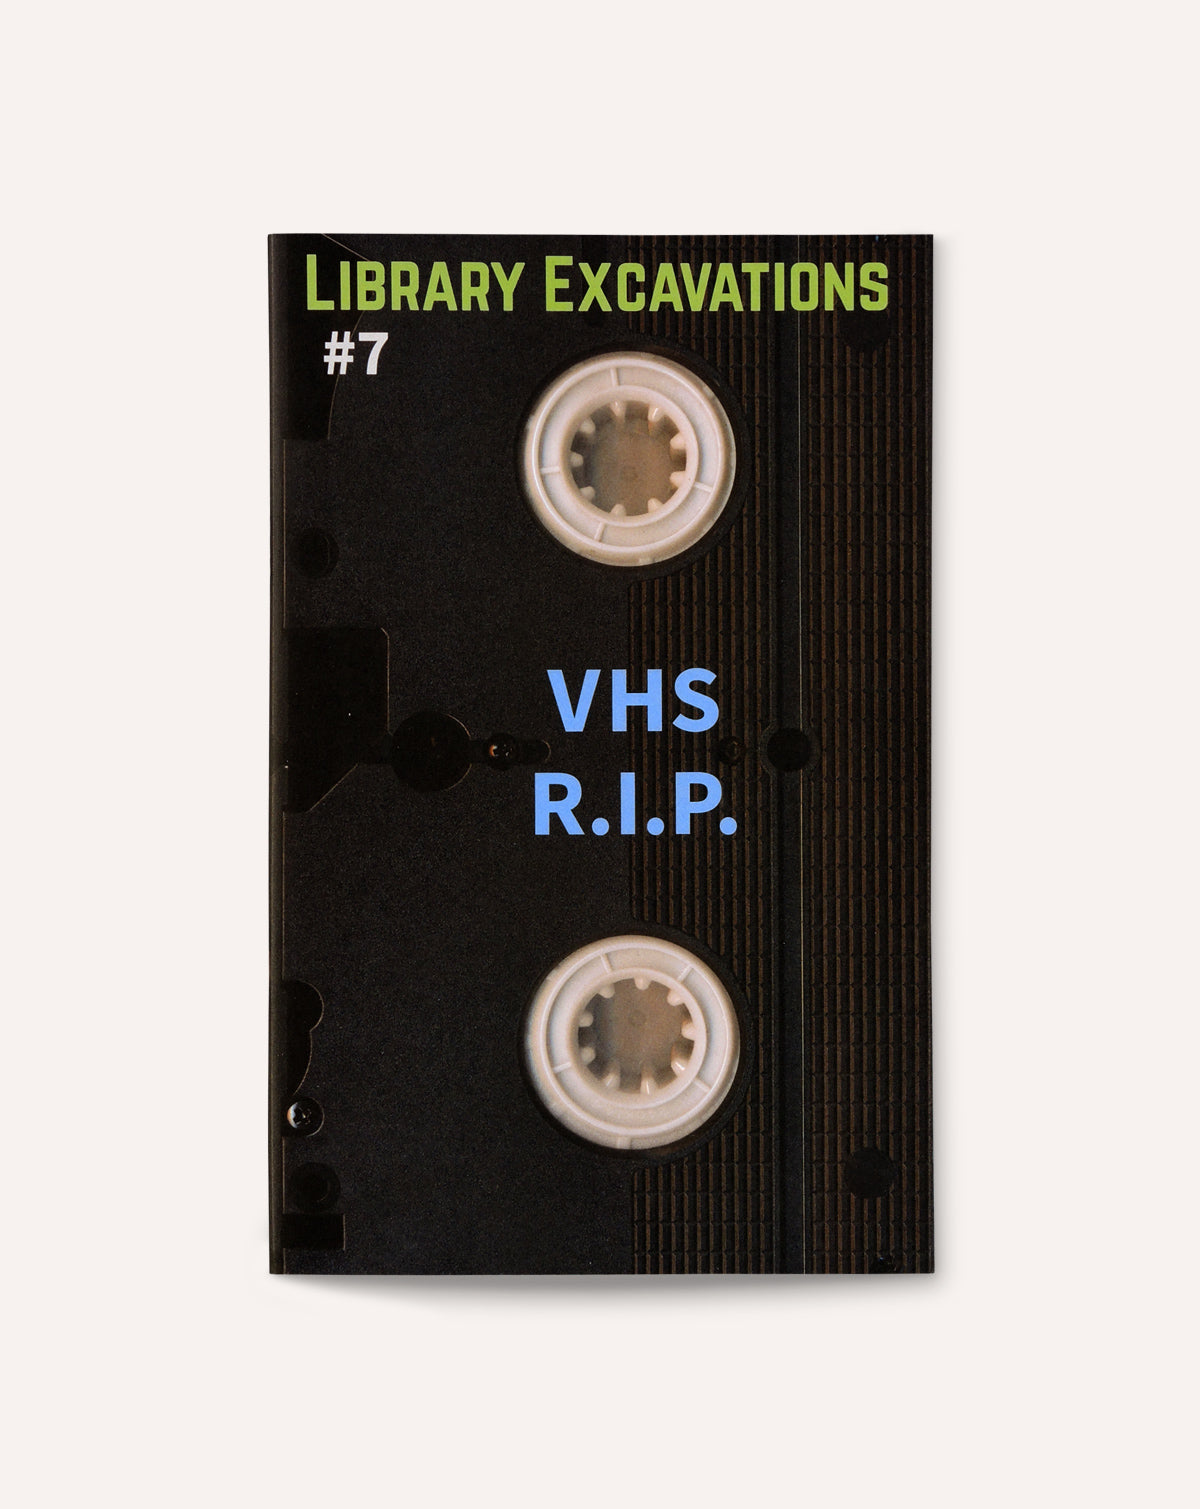 Library Excavations #7: VHS R.I.P.